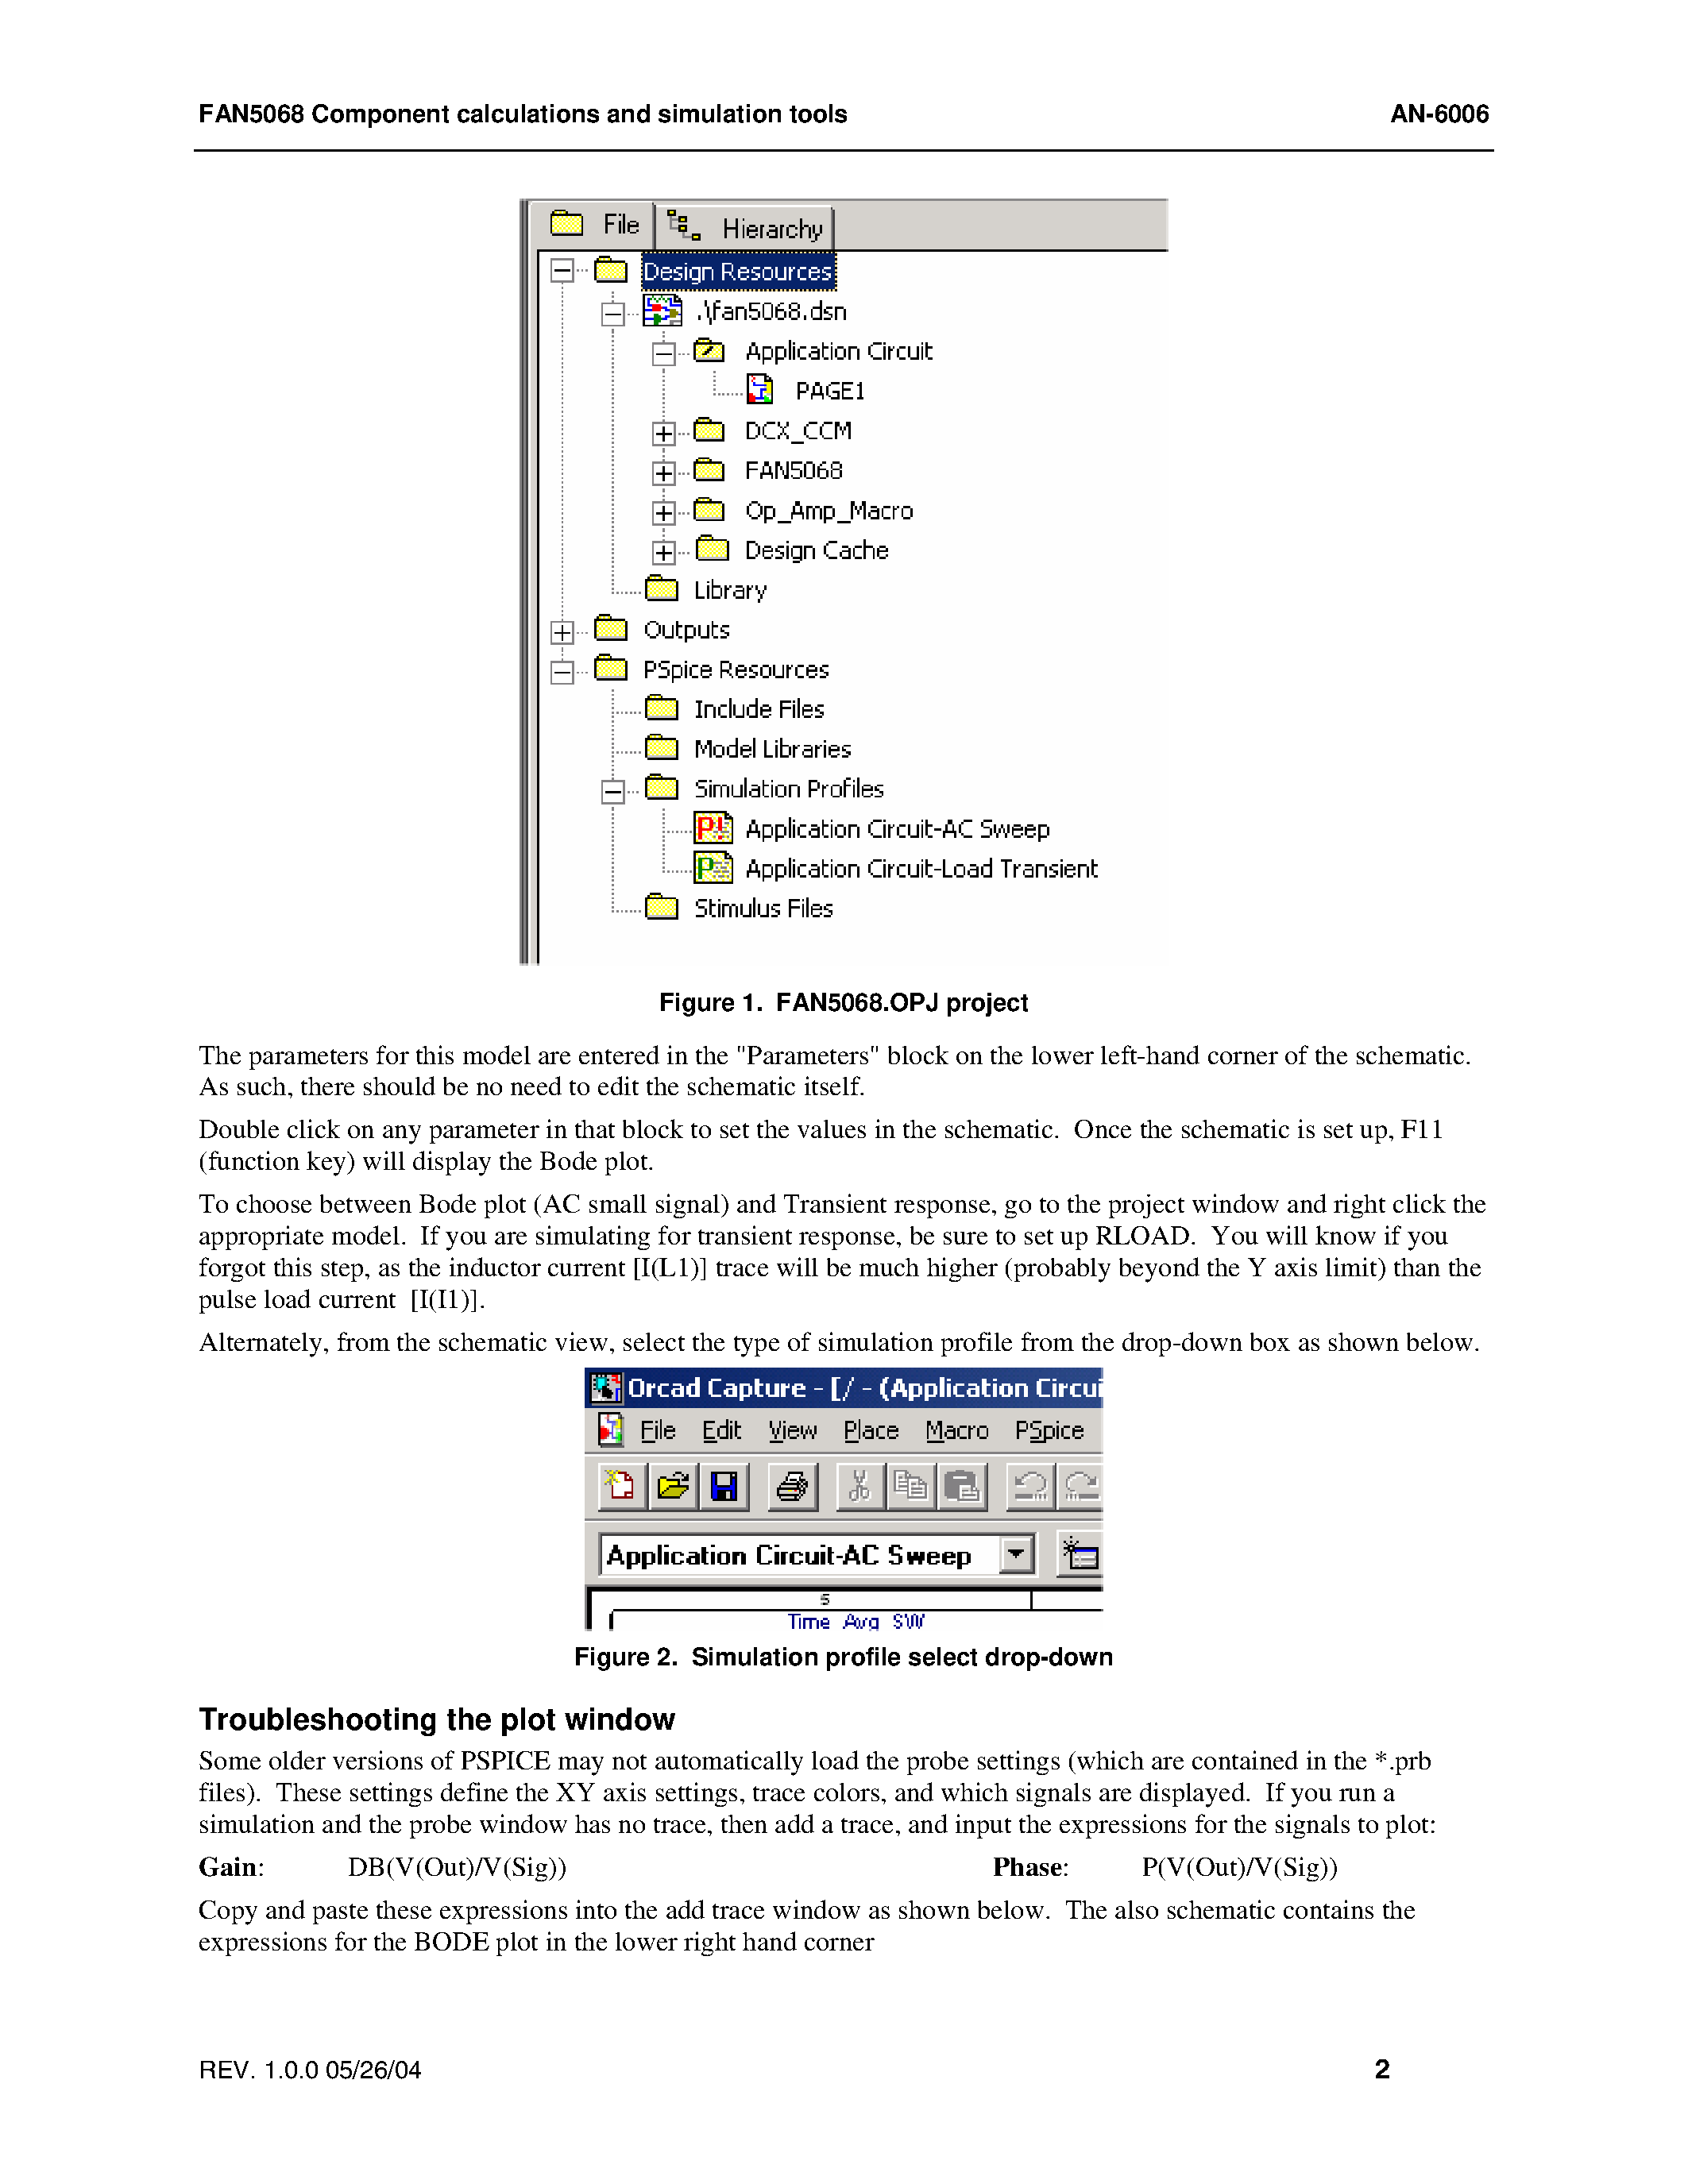 Datasheet FAN5068ACPI - FAN5068 Component calculation and simulation tools page 2